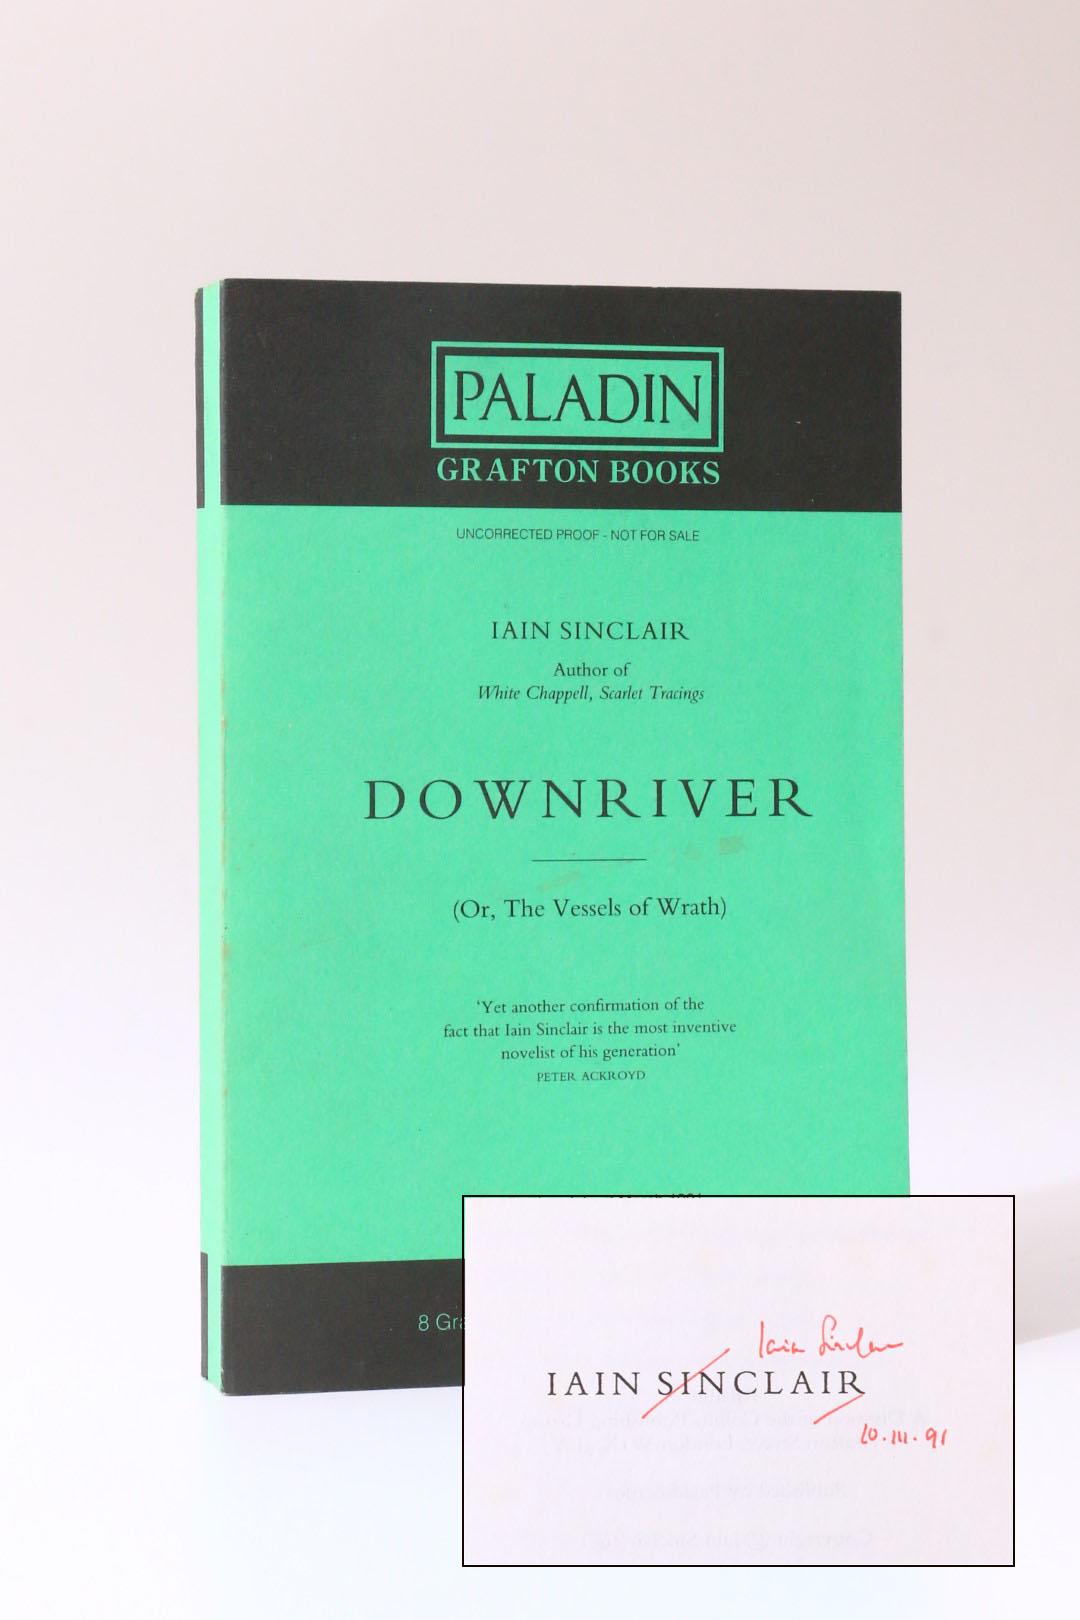 Iain Sinclair - Downriver (Or, The Vessels of Wrath) - Grafton, 1991, Proof. Signed